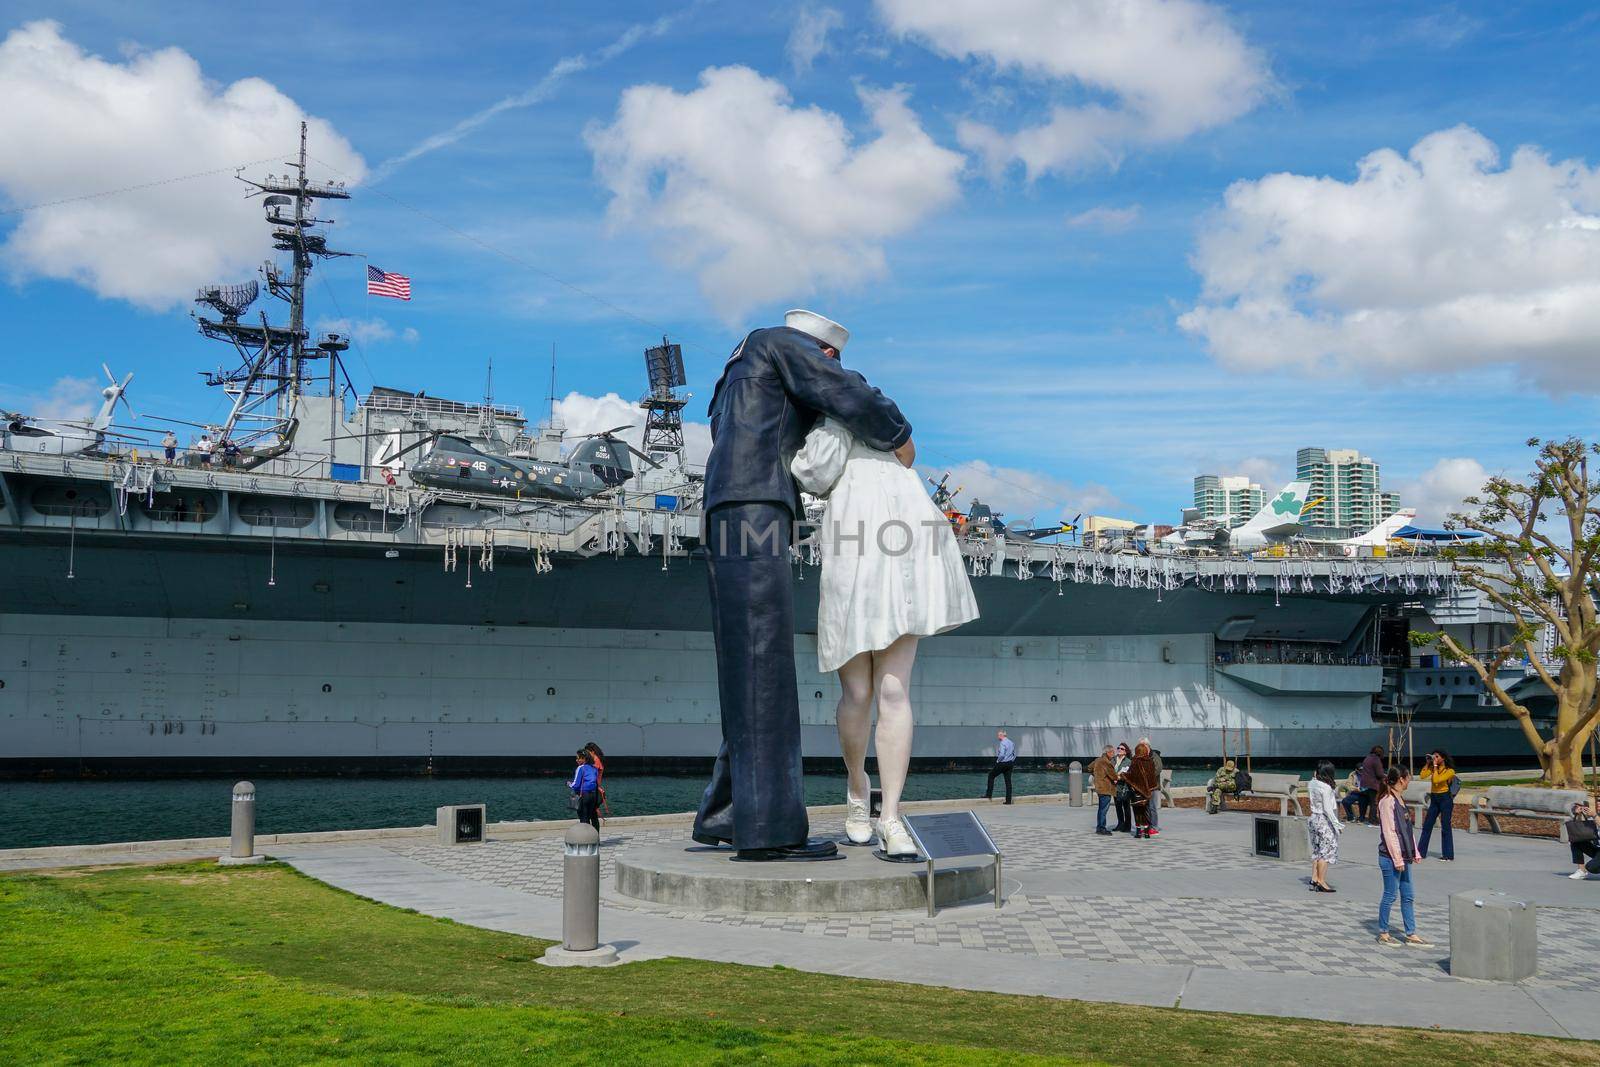 Kissing sailor statue, Port of San Diego. also known as Unconditional Surrender, recreates famous embrace between a sailor and a nurse celebrating the end of second world war. USA. February 12, 2021